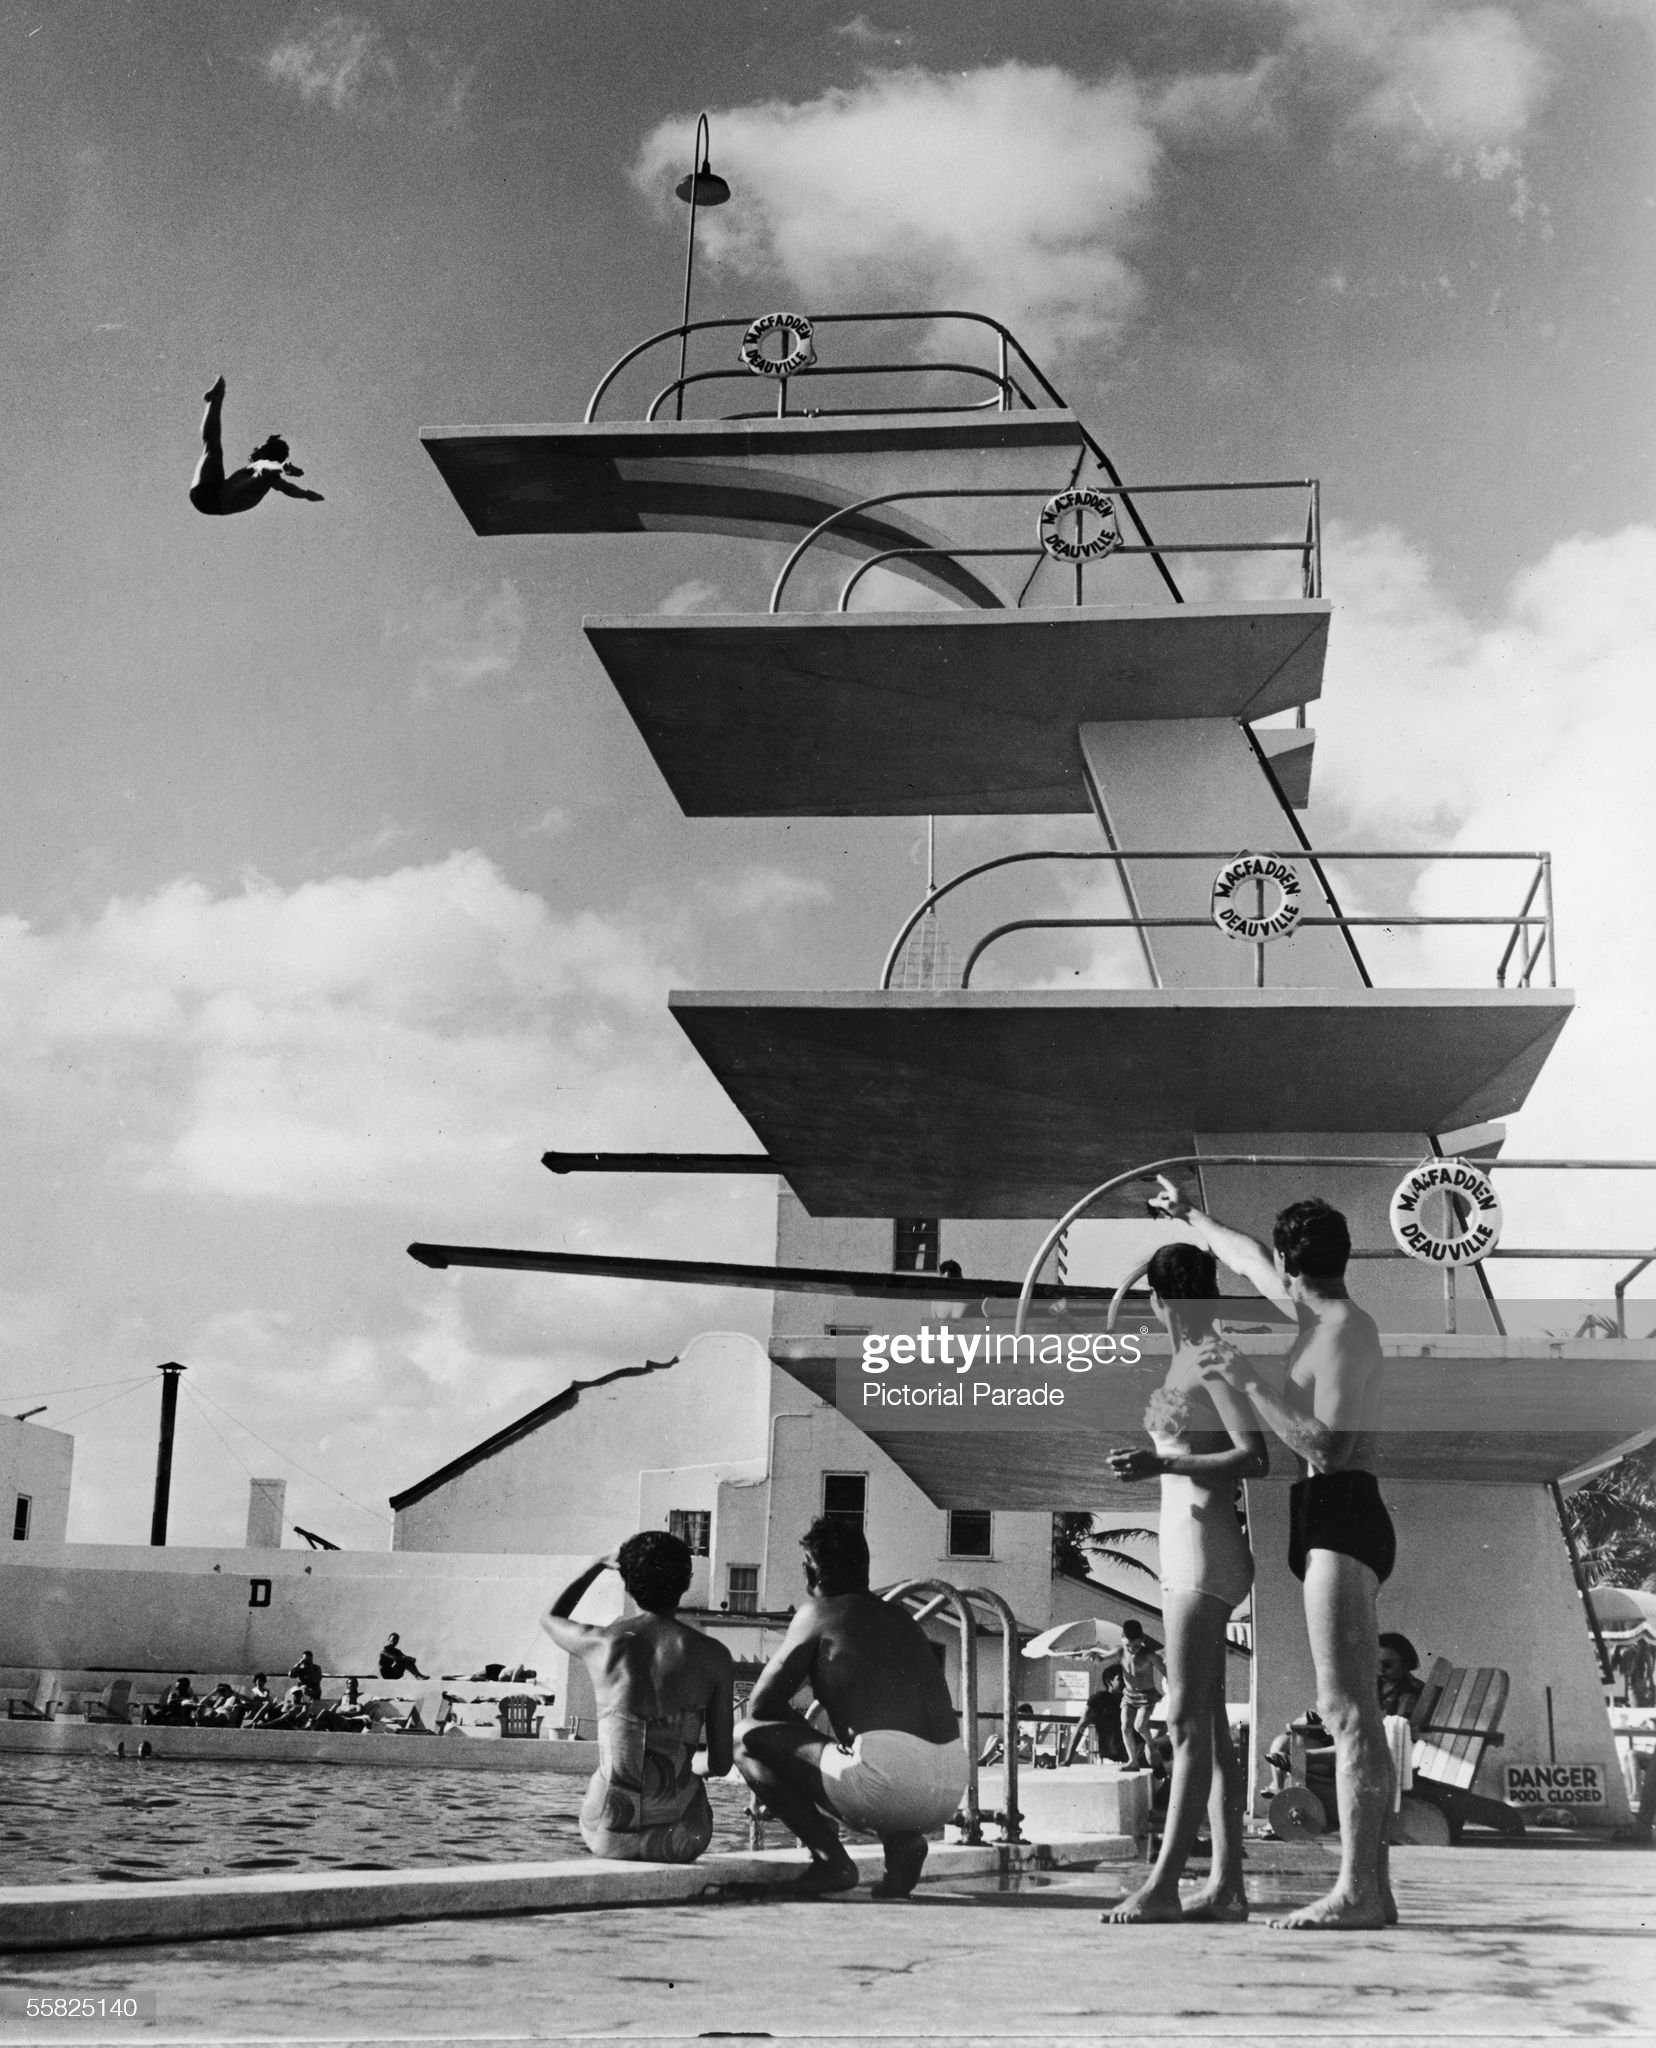 People sit poolside and watch as a swimmer dives off the high platform of the Olympic-size swimming pool at the MacFadden - Deauville Hotel (now the Deauville Beach Resort), Miami Beach, Florida, 1950s. 